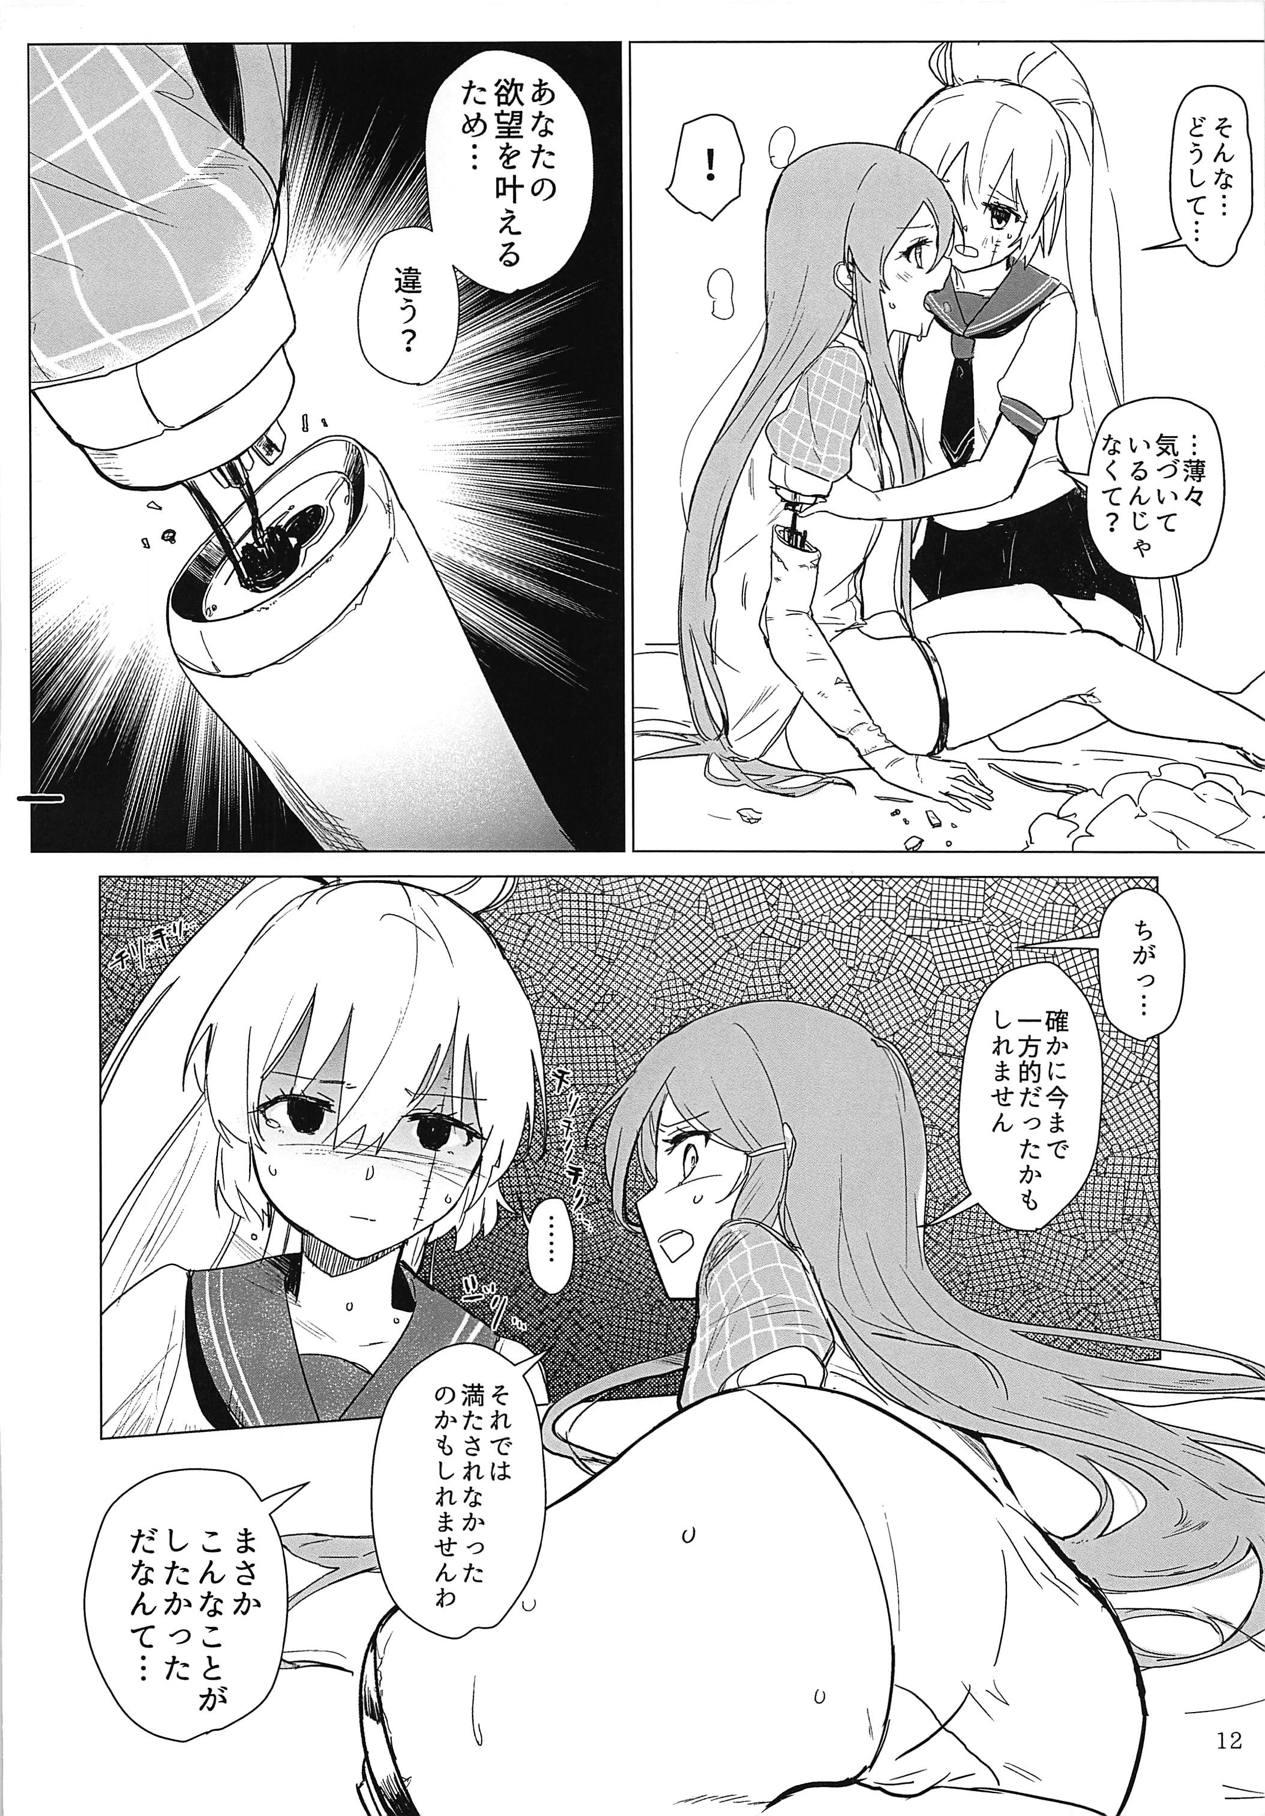 Tittyfuck Sweet Poison in Noble Blend - Akuma no riddle Amatuer Sex - Page 11